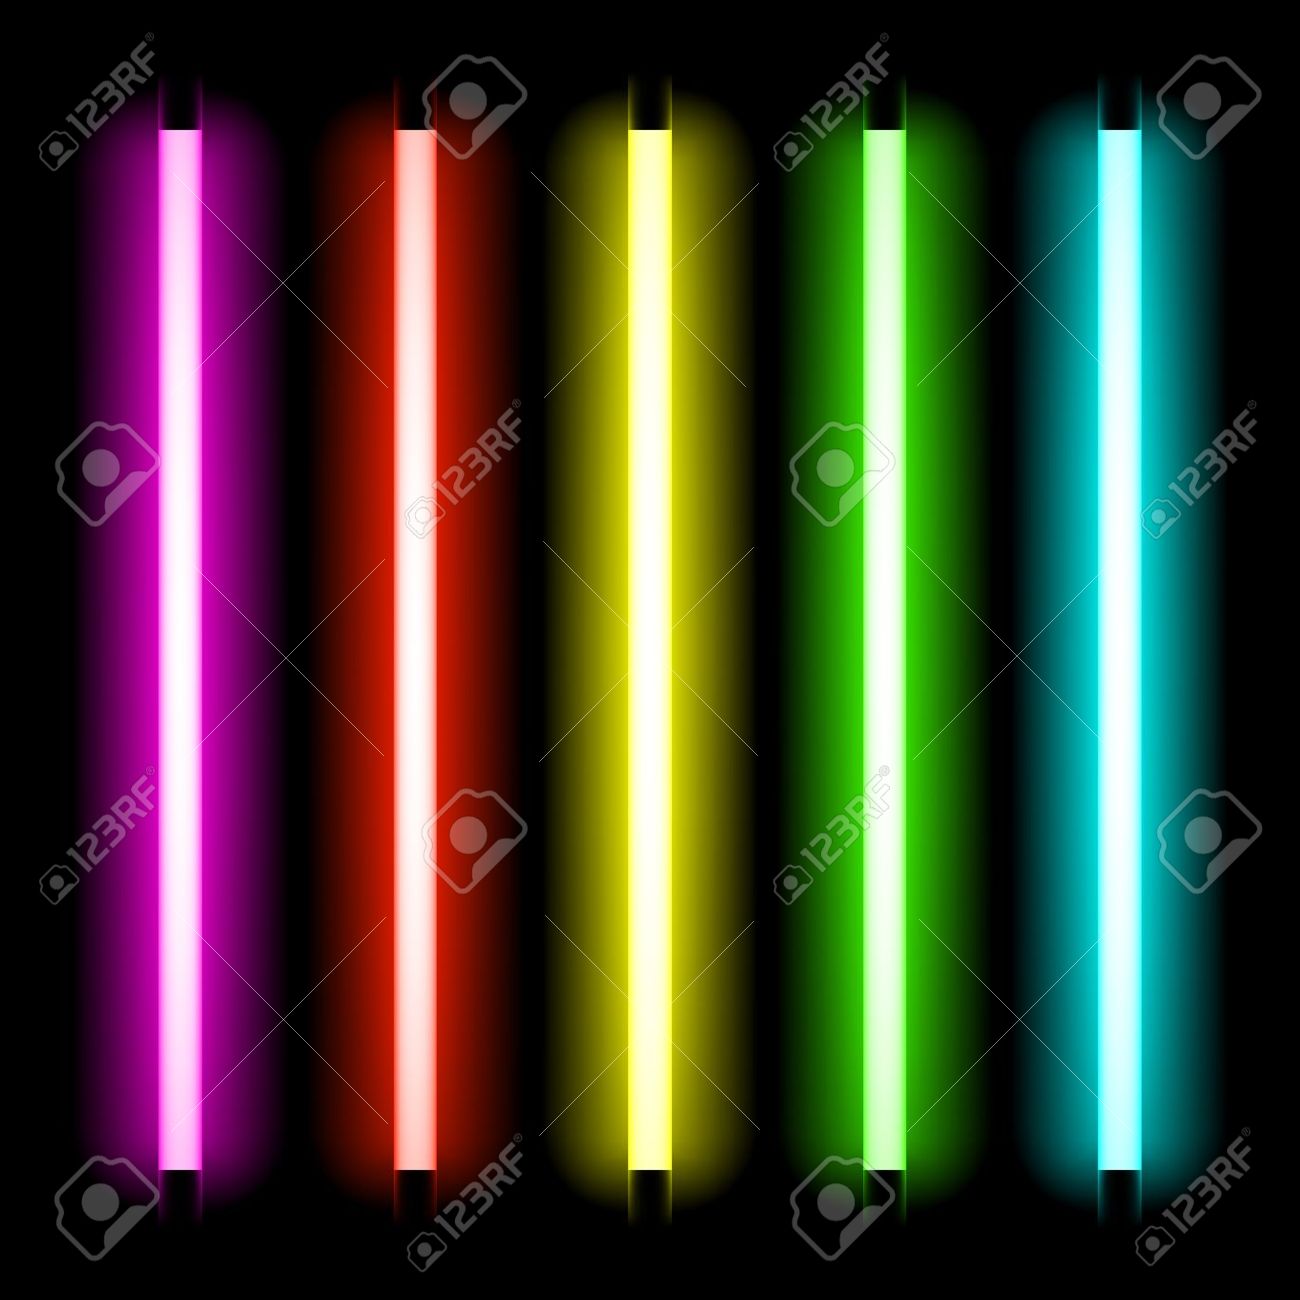 Led tube clipart - Clipground